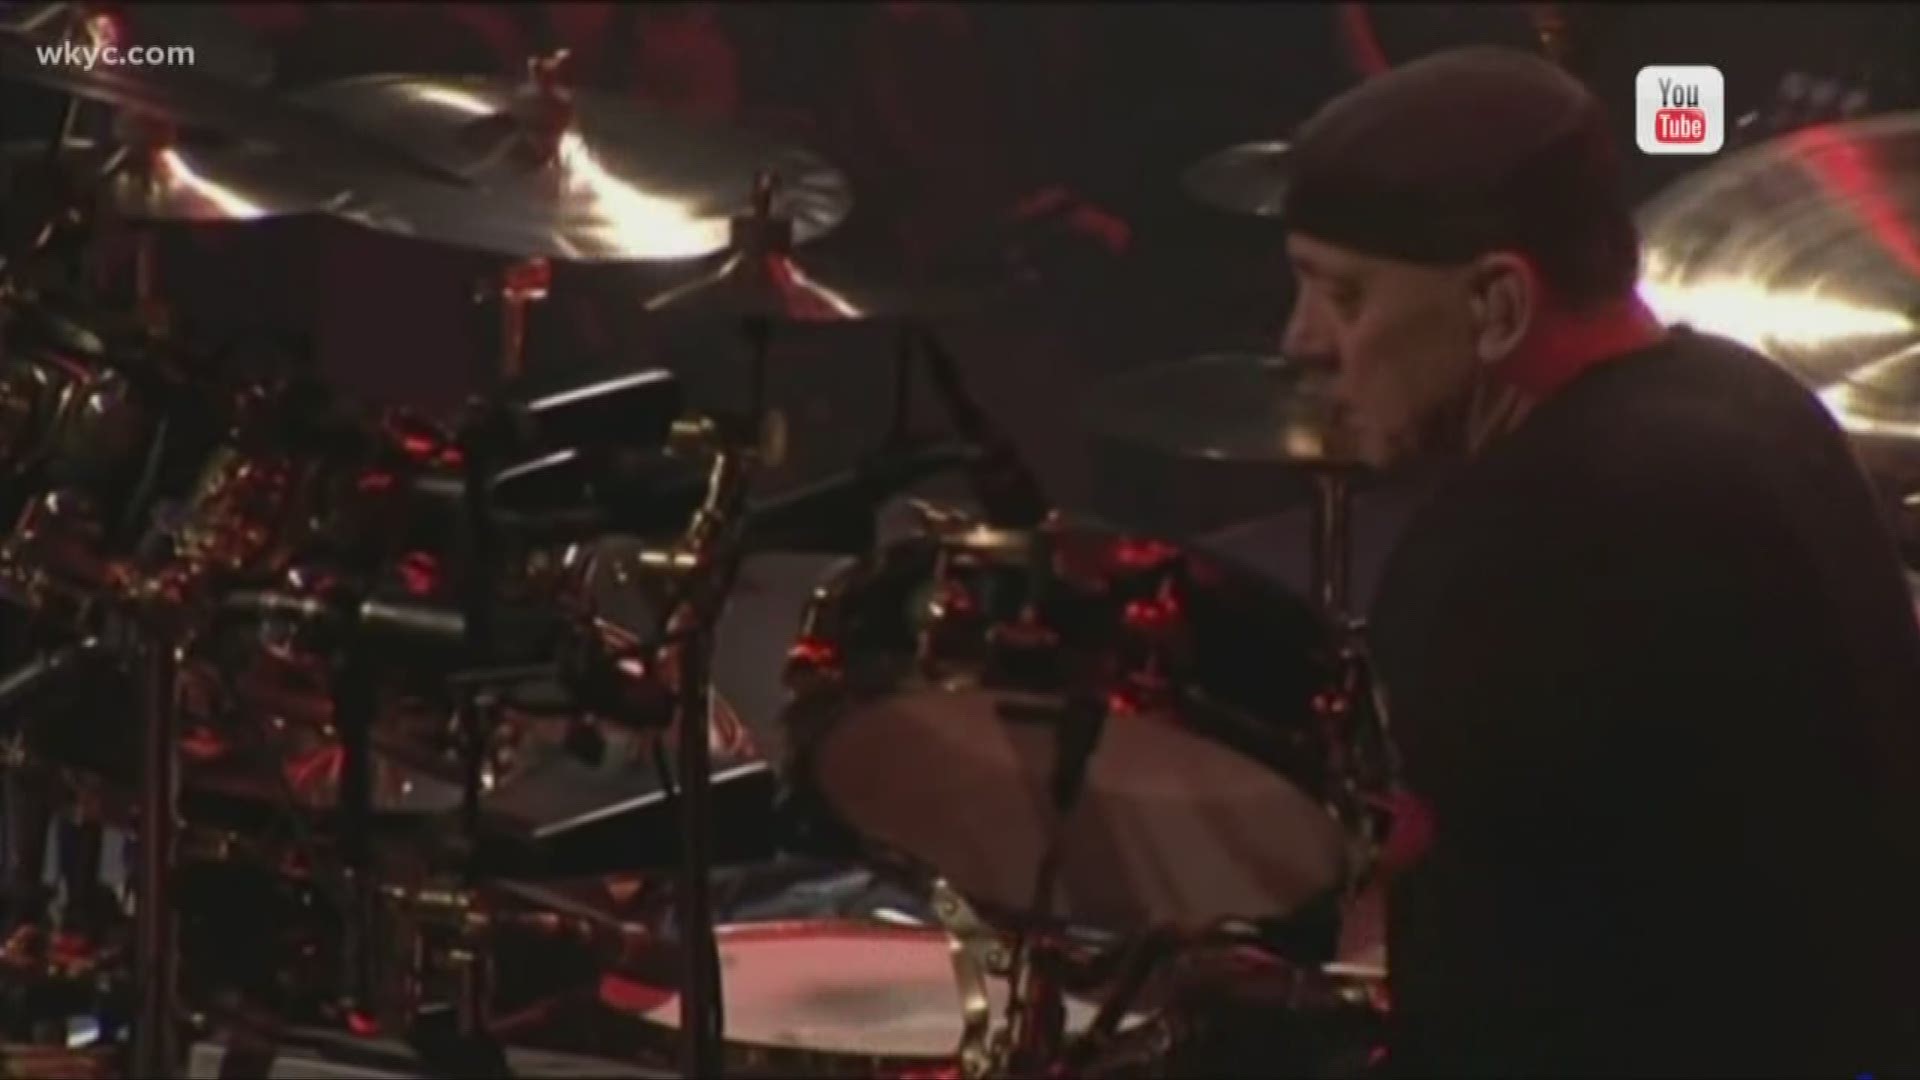 The Canadian musician is often considered as one of the greatest drummers of all-time. A family spokesperson said Peart was battling brain cancer for three years.